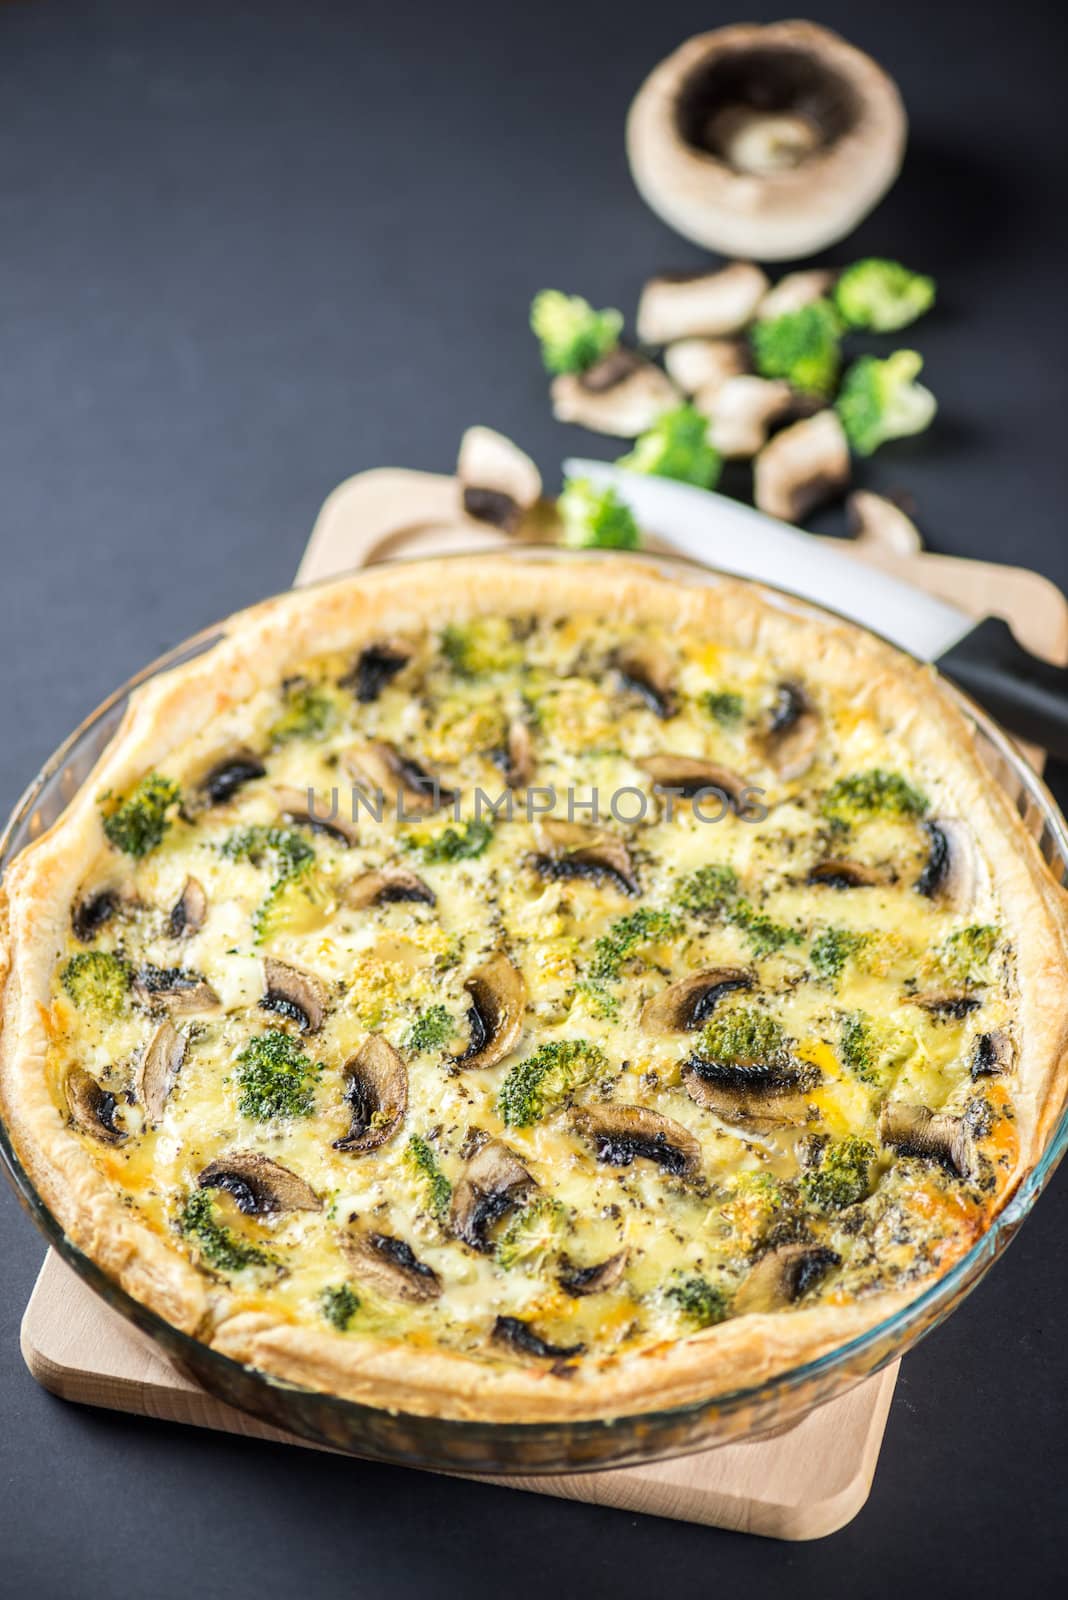 Delicious mushroom quiche on black background with knife